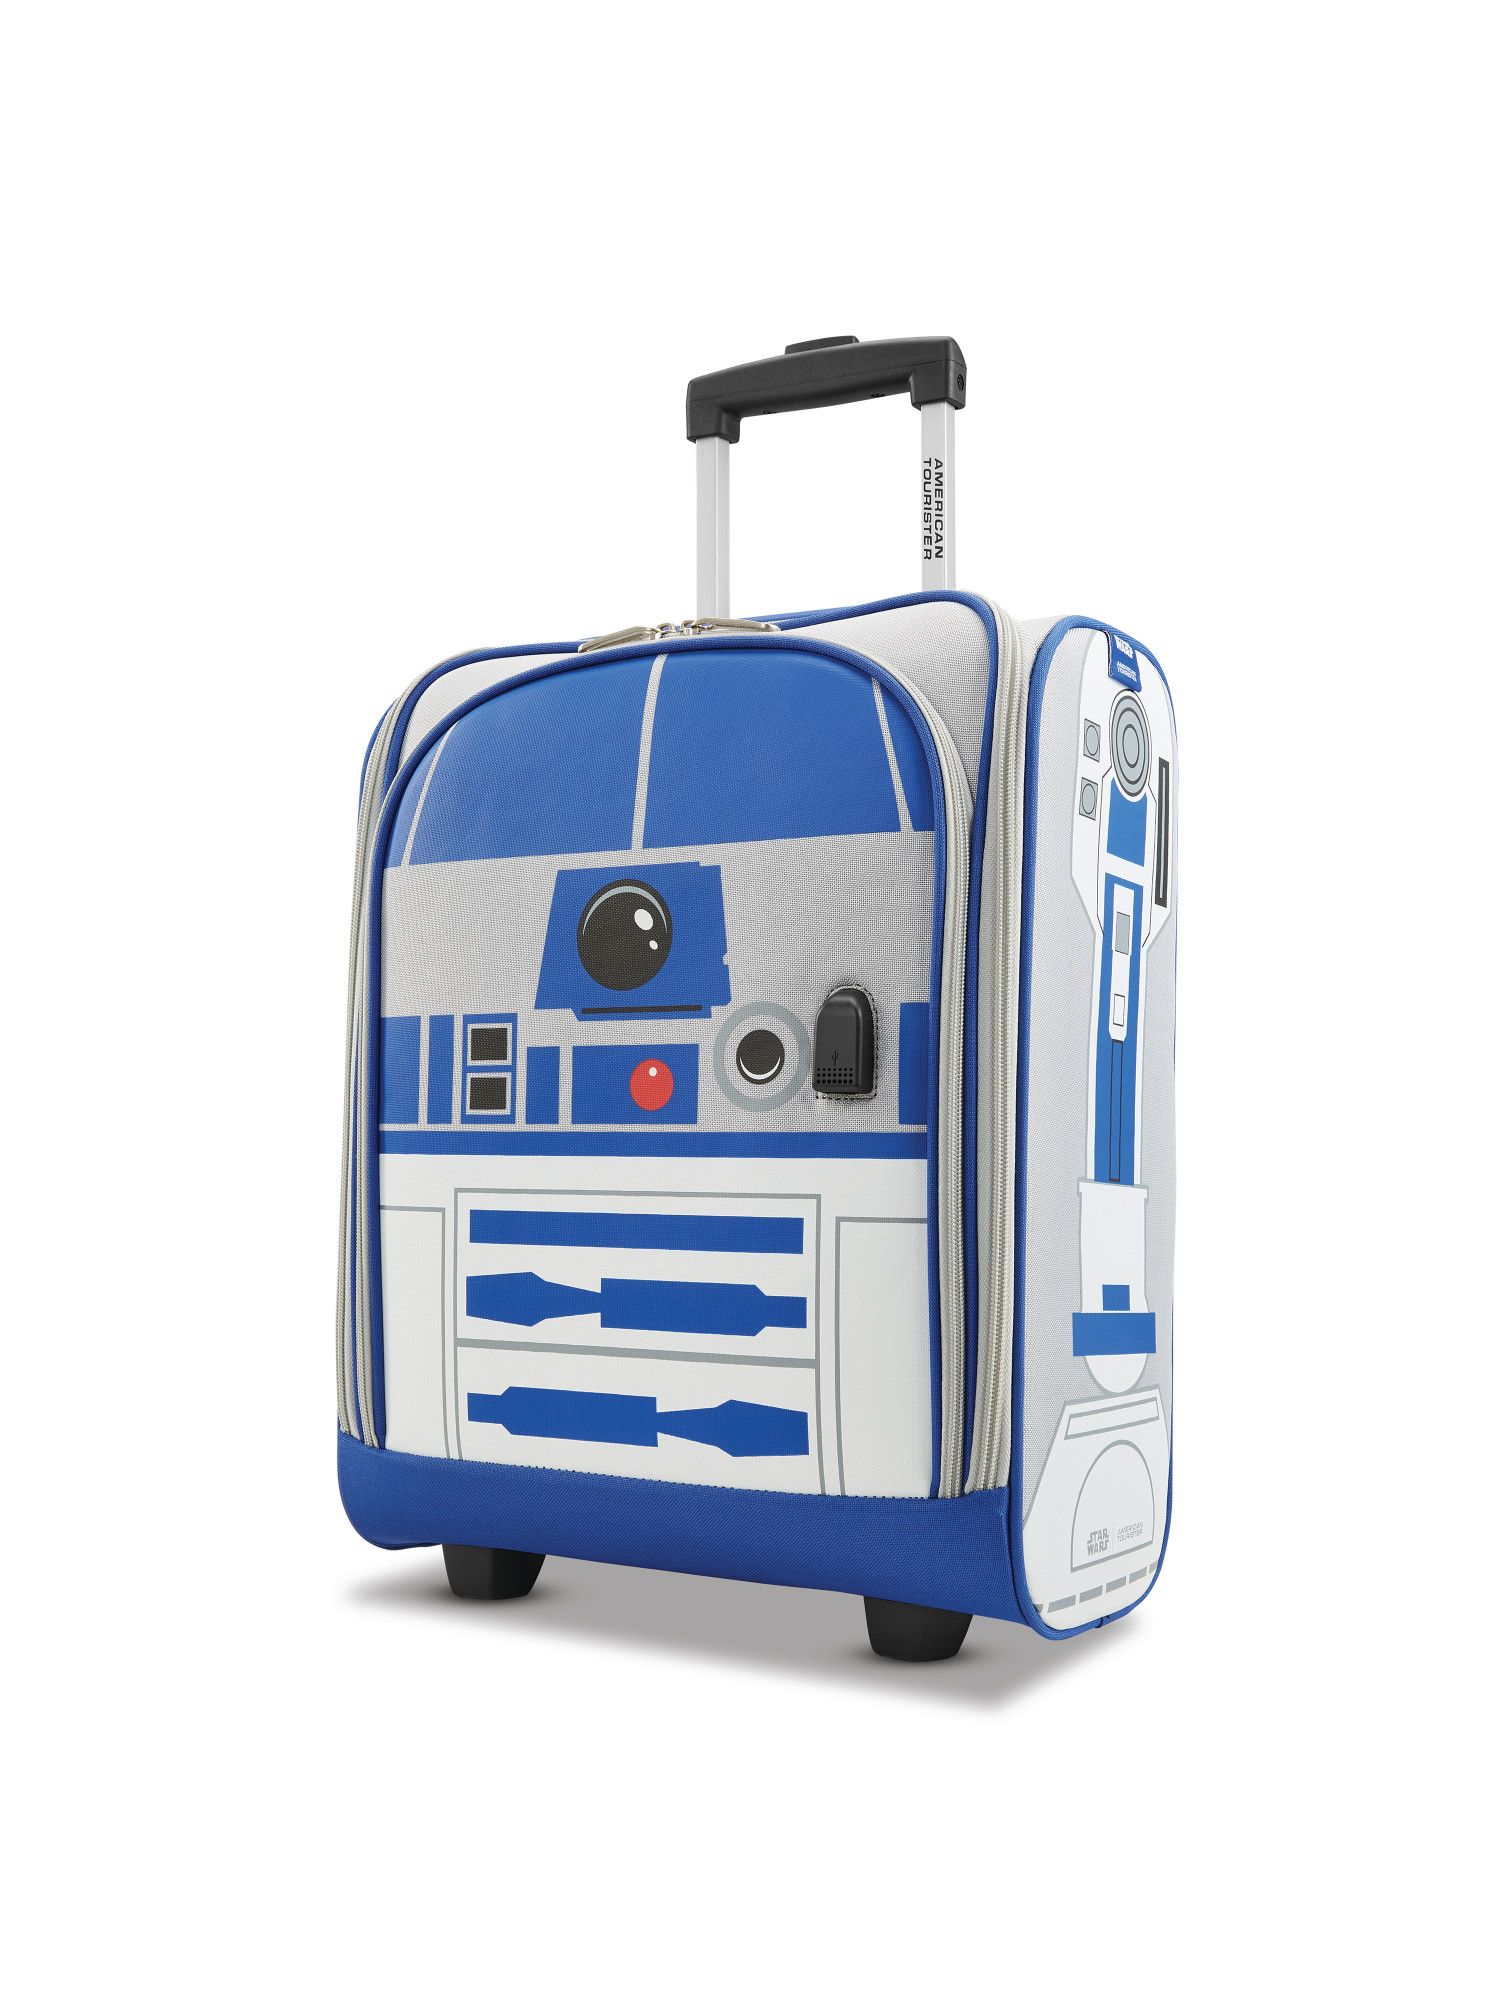 American Tourister Star Wars Underseater Luggage -$49.99(58% Off)